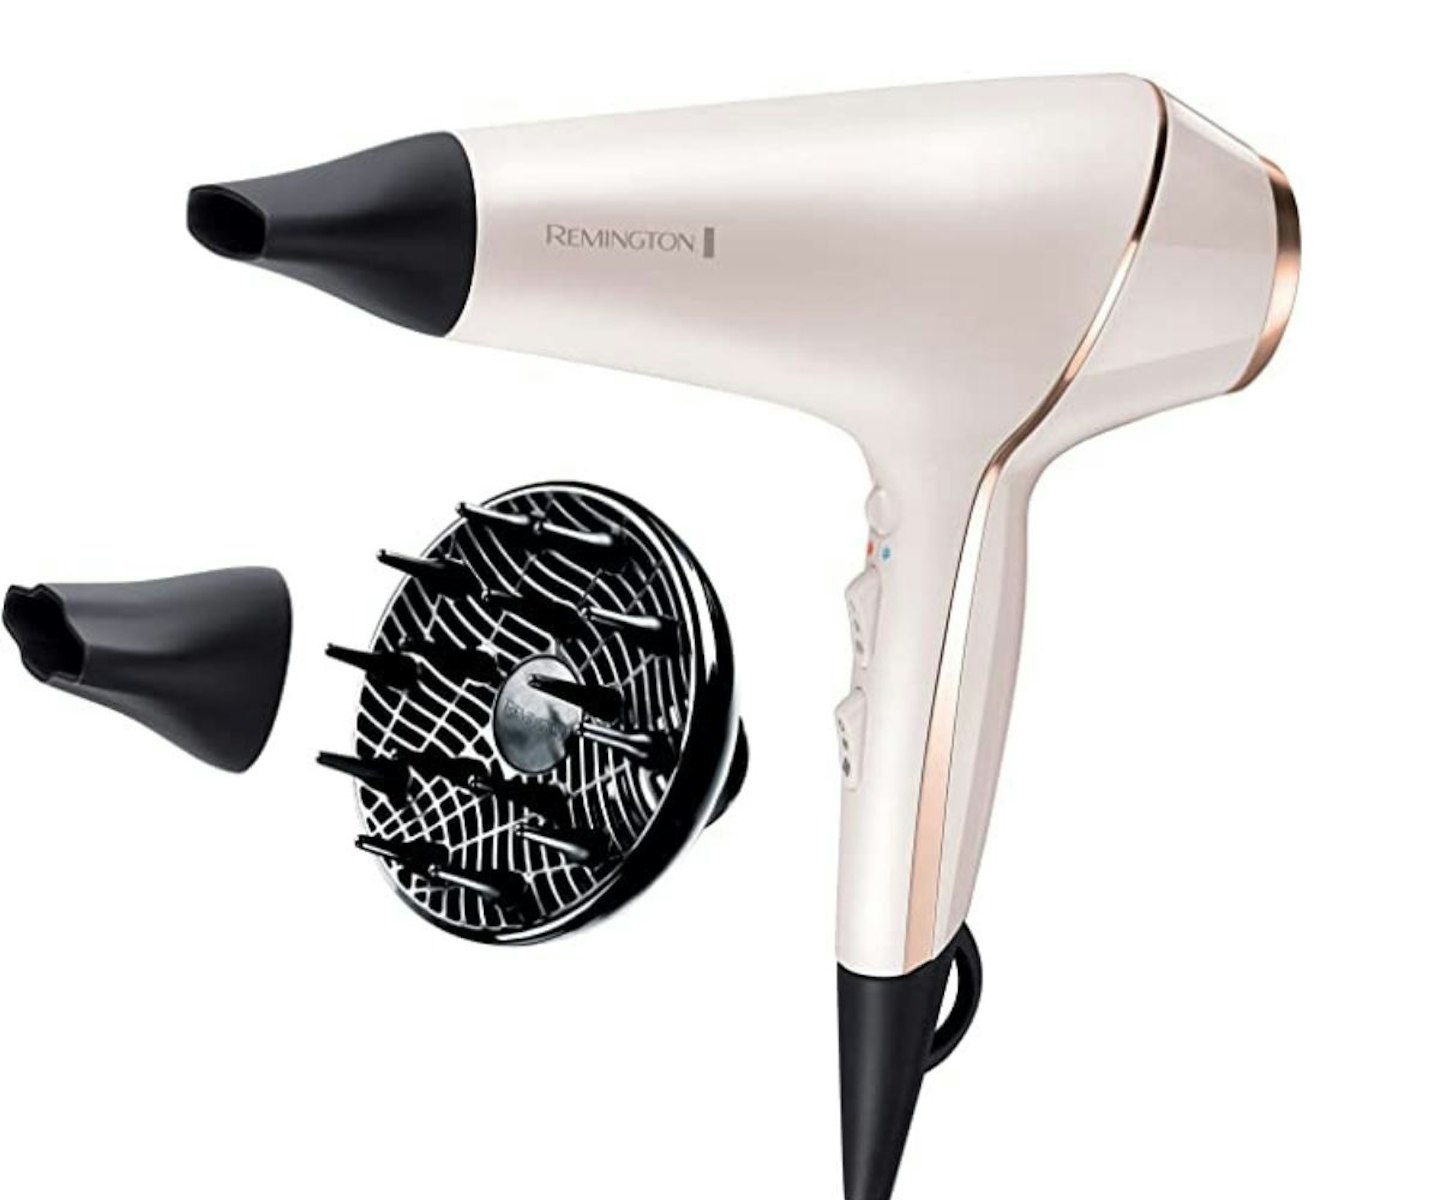 Remington Proluxe Ionic Hairdryer with Styling Shot and Intelligent OPTIHeat Control